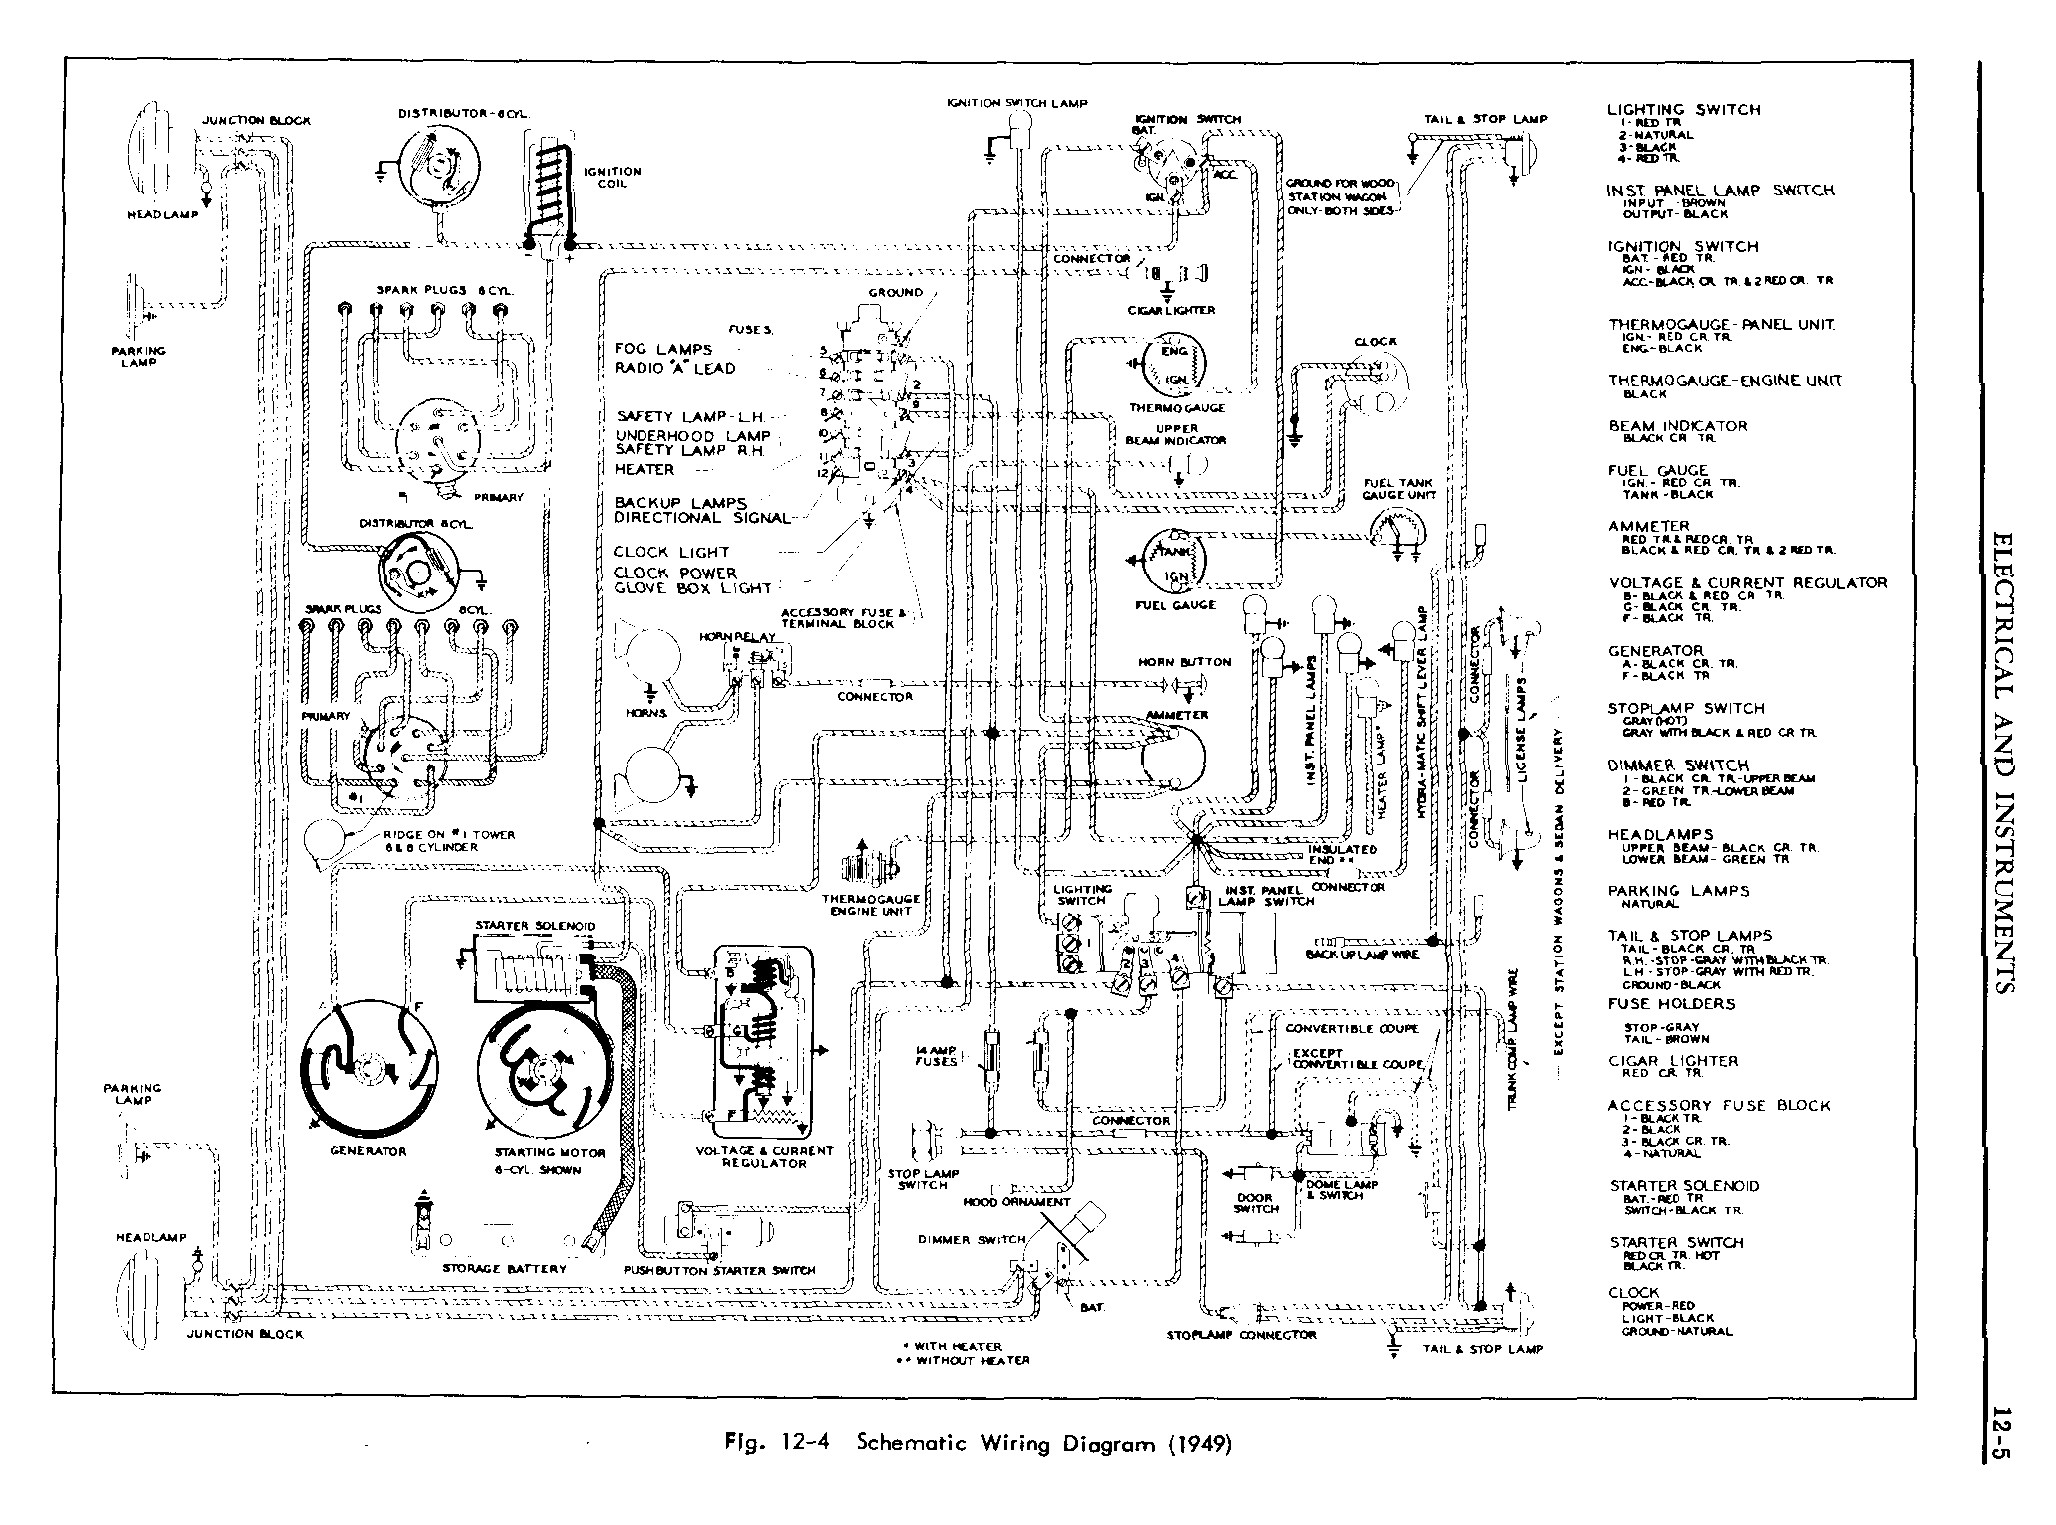 1949 Pontiac Shop Manual- Electrical and Instruments Page 5 of 54